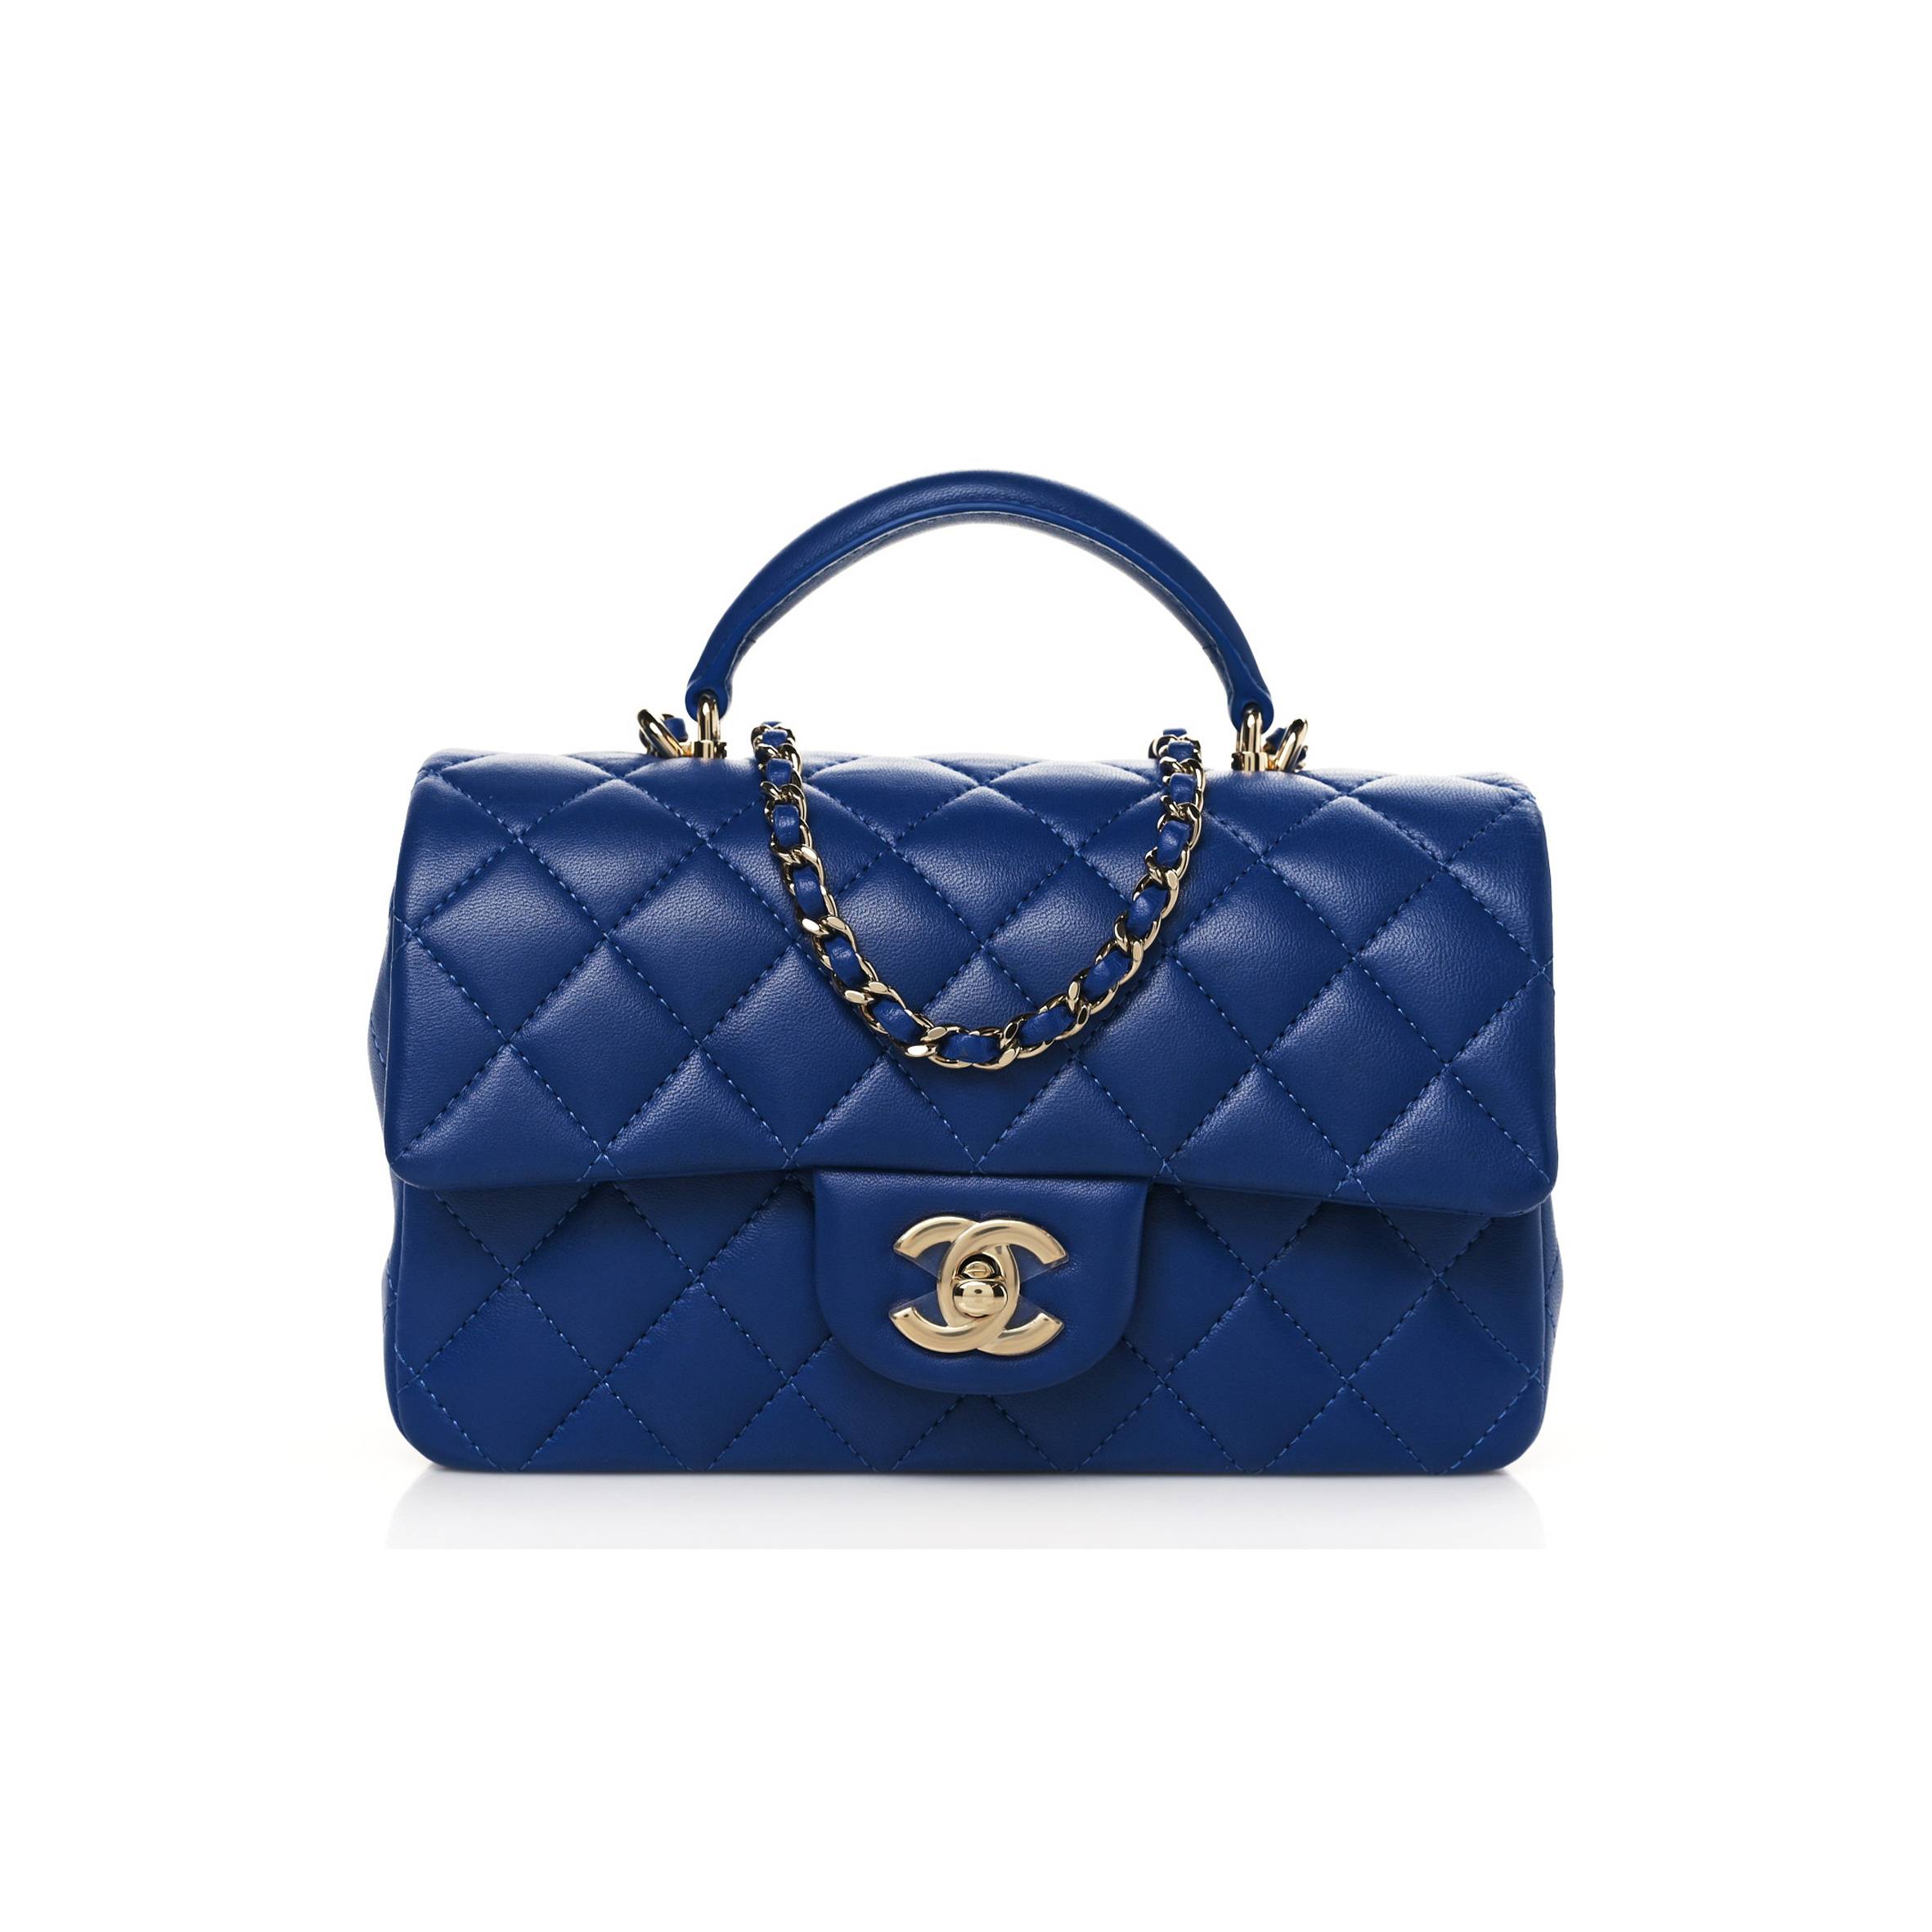 CHANEL LAMBSKIN QUILTED MINI TOP HANDLE RECTANGULAR FLAP BLUE ROSE GOLD HARDWARE (20*12*6cm)